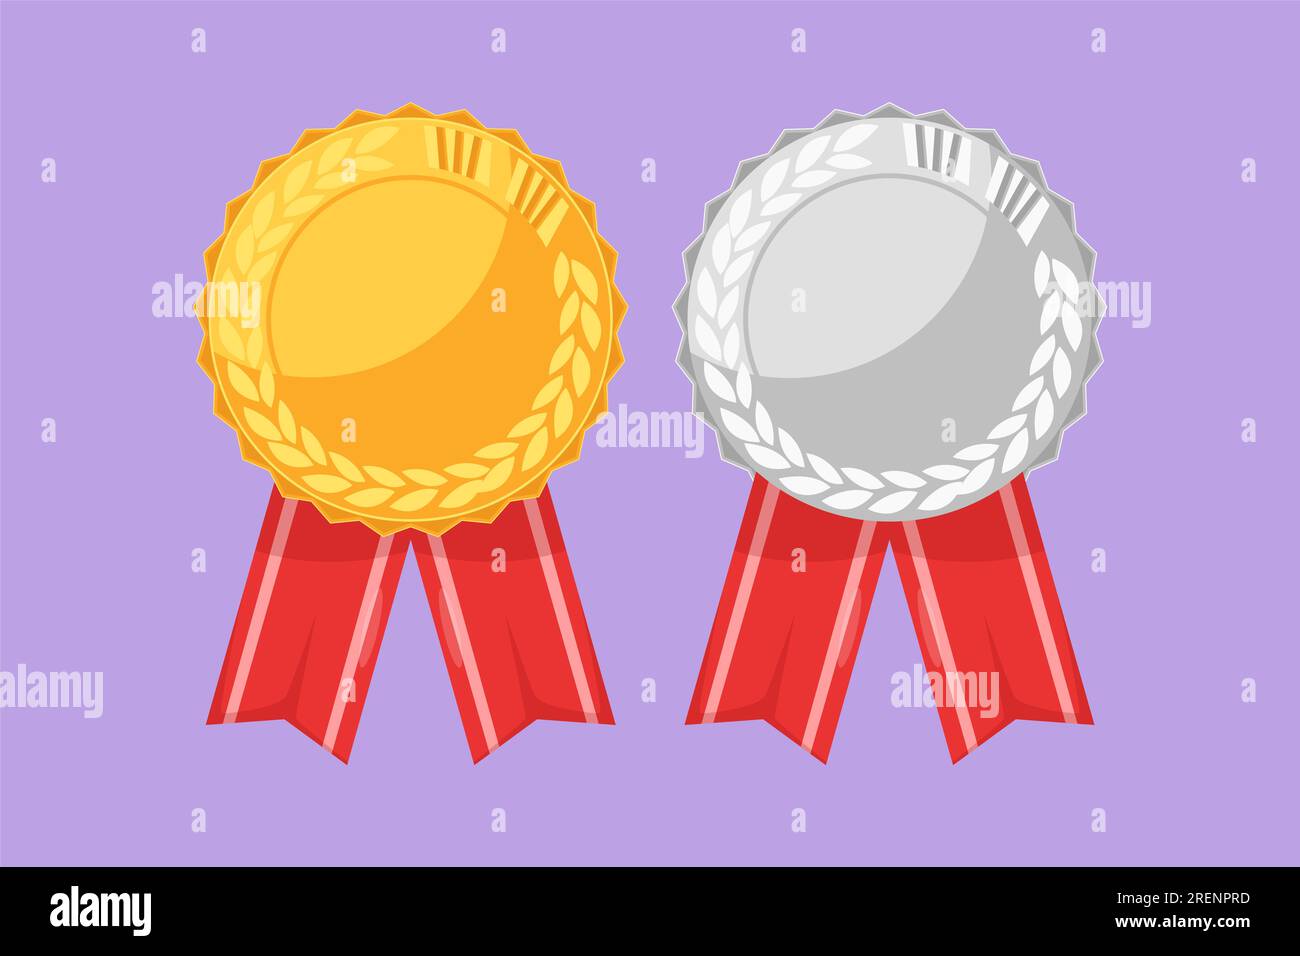 Graphic flat design drawing gold and silver medals realistic set with ribbons. Winner awards symbols. Achievement from competition, tournament, league Stock Photo